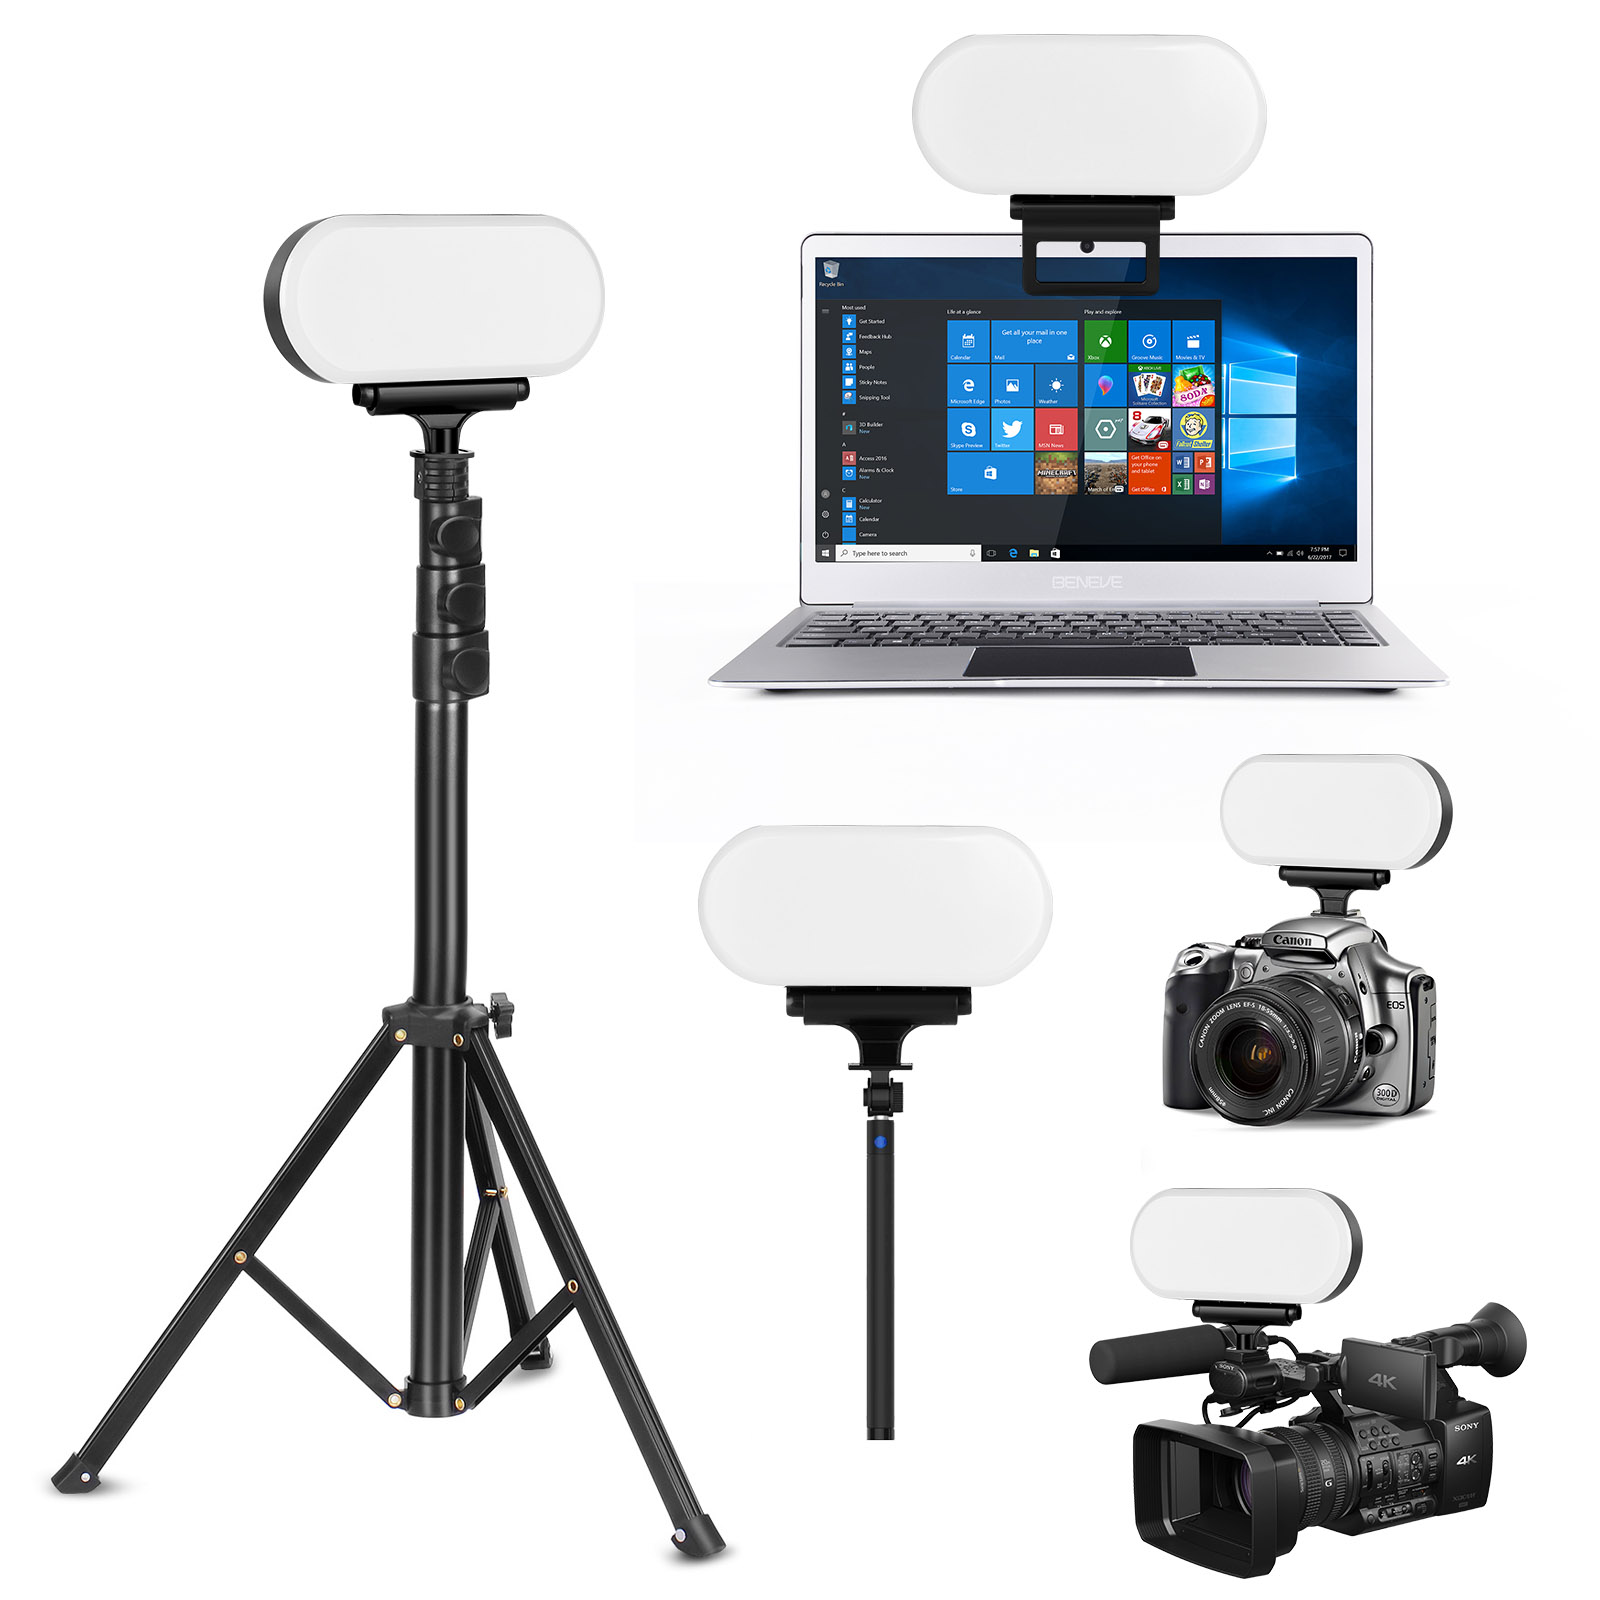 Z2-Video-Light-2600K-6000k-Fill-Lamp-with-Three-Stands-for-Camera-Sport-Cameras-PC-Laptop-Phone-Trip-1868163-2